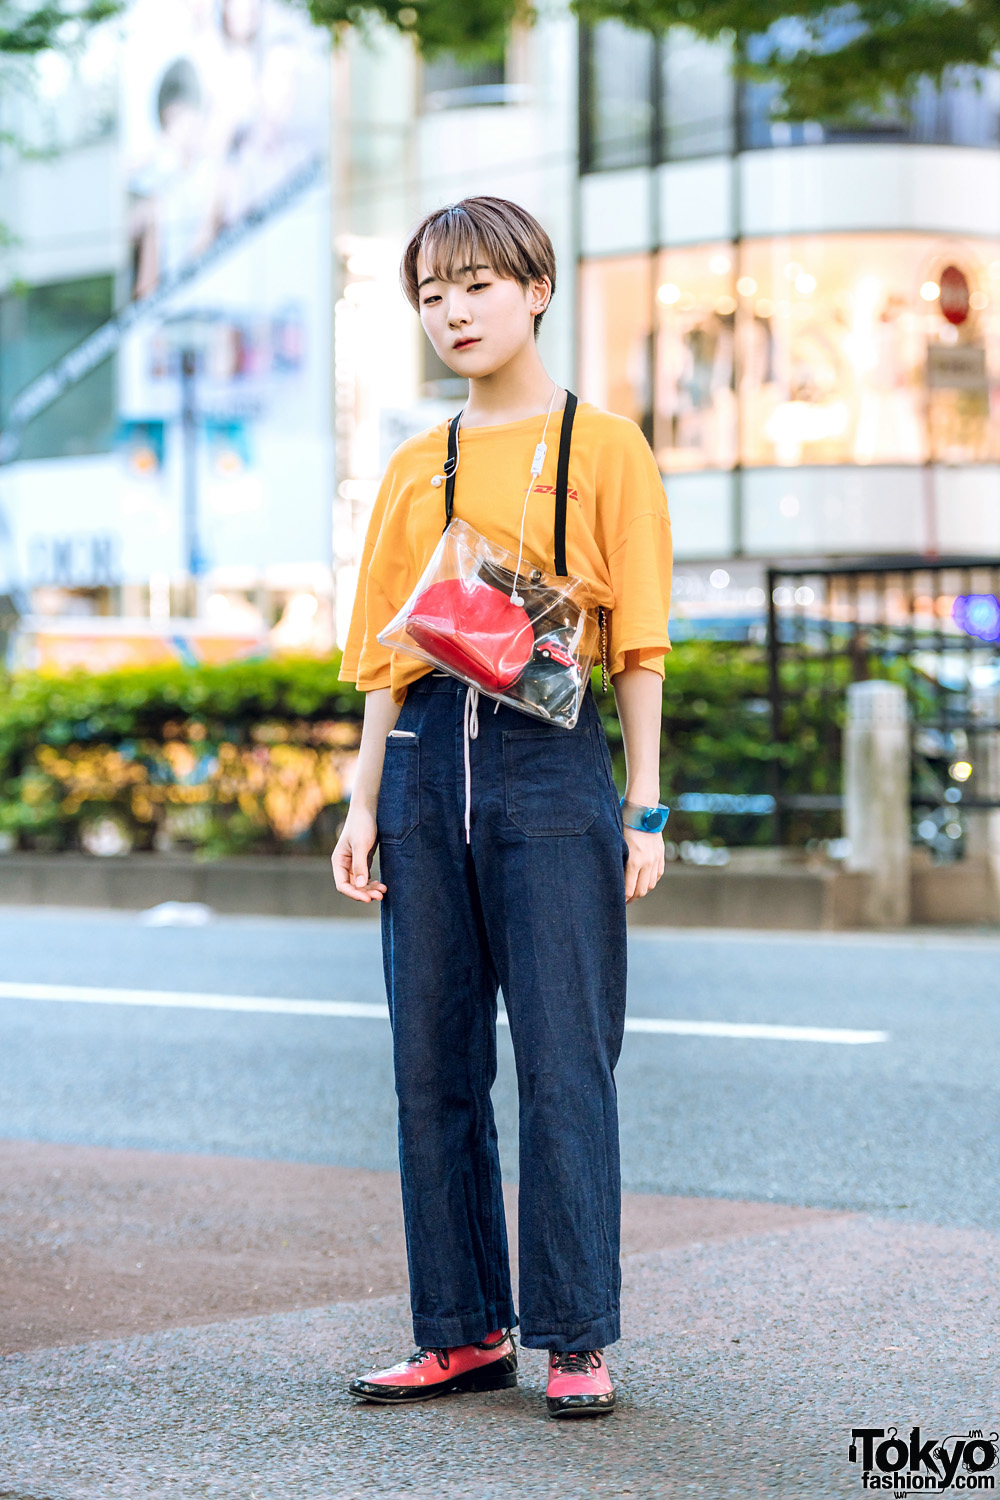 Japanese Streetwear Style w/ DHL T-Shirt, Comme des Garcons Lace-Up Shoes, Gucci Pouch & Issey Miyake Watch